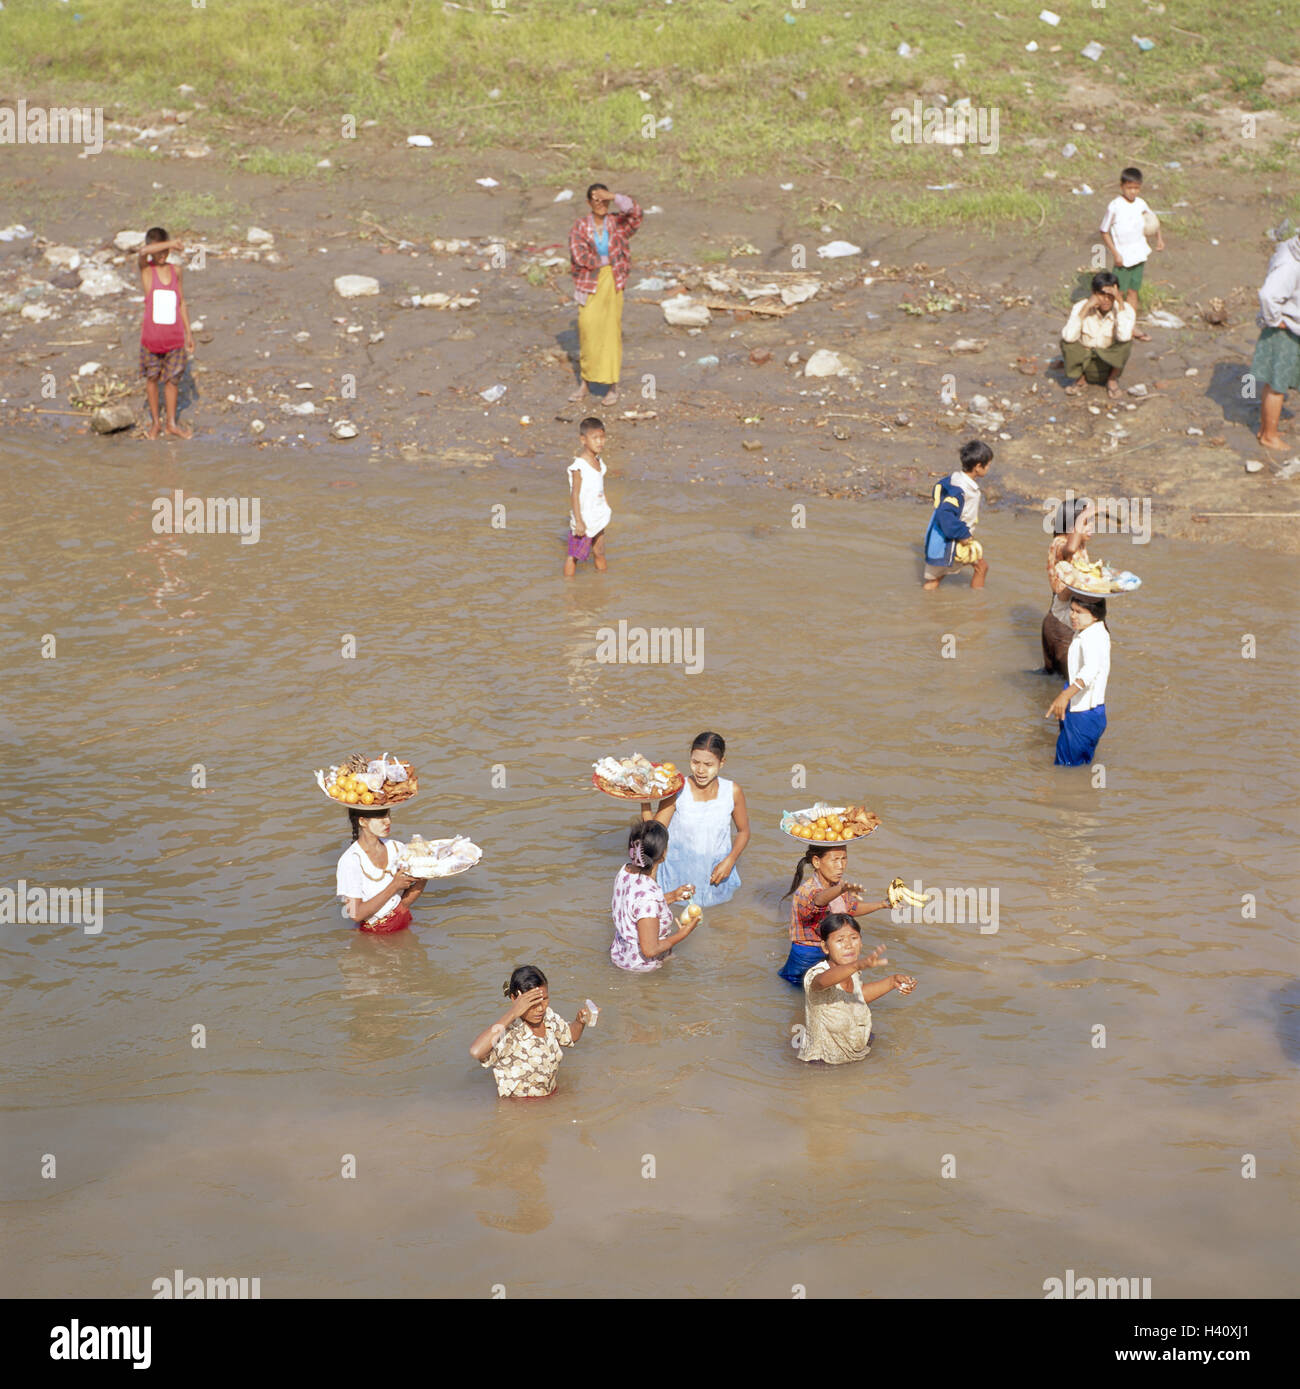 Myanmar, Bagan, River Ayeyarwady, women, stand, sell water, sales, fruits no model to release Asia, Indochina, Burma, scenery, waters, course of a river, locals, market women, head costs, fruit, trade, economy, outside Stock Photo